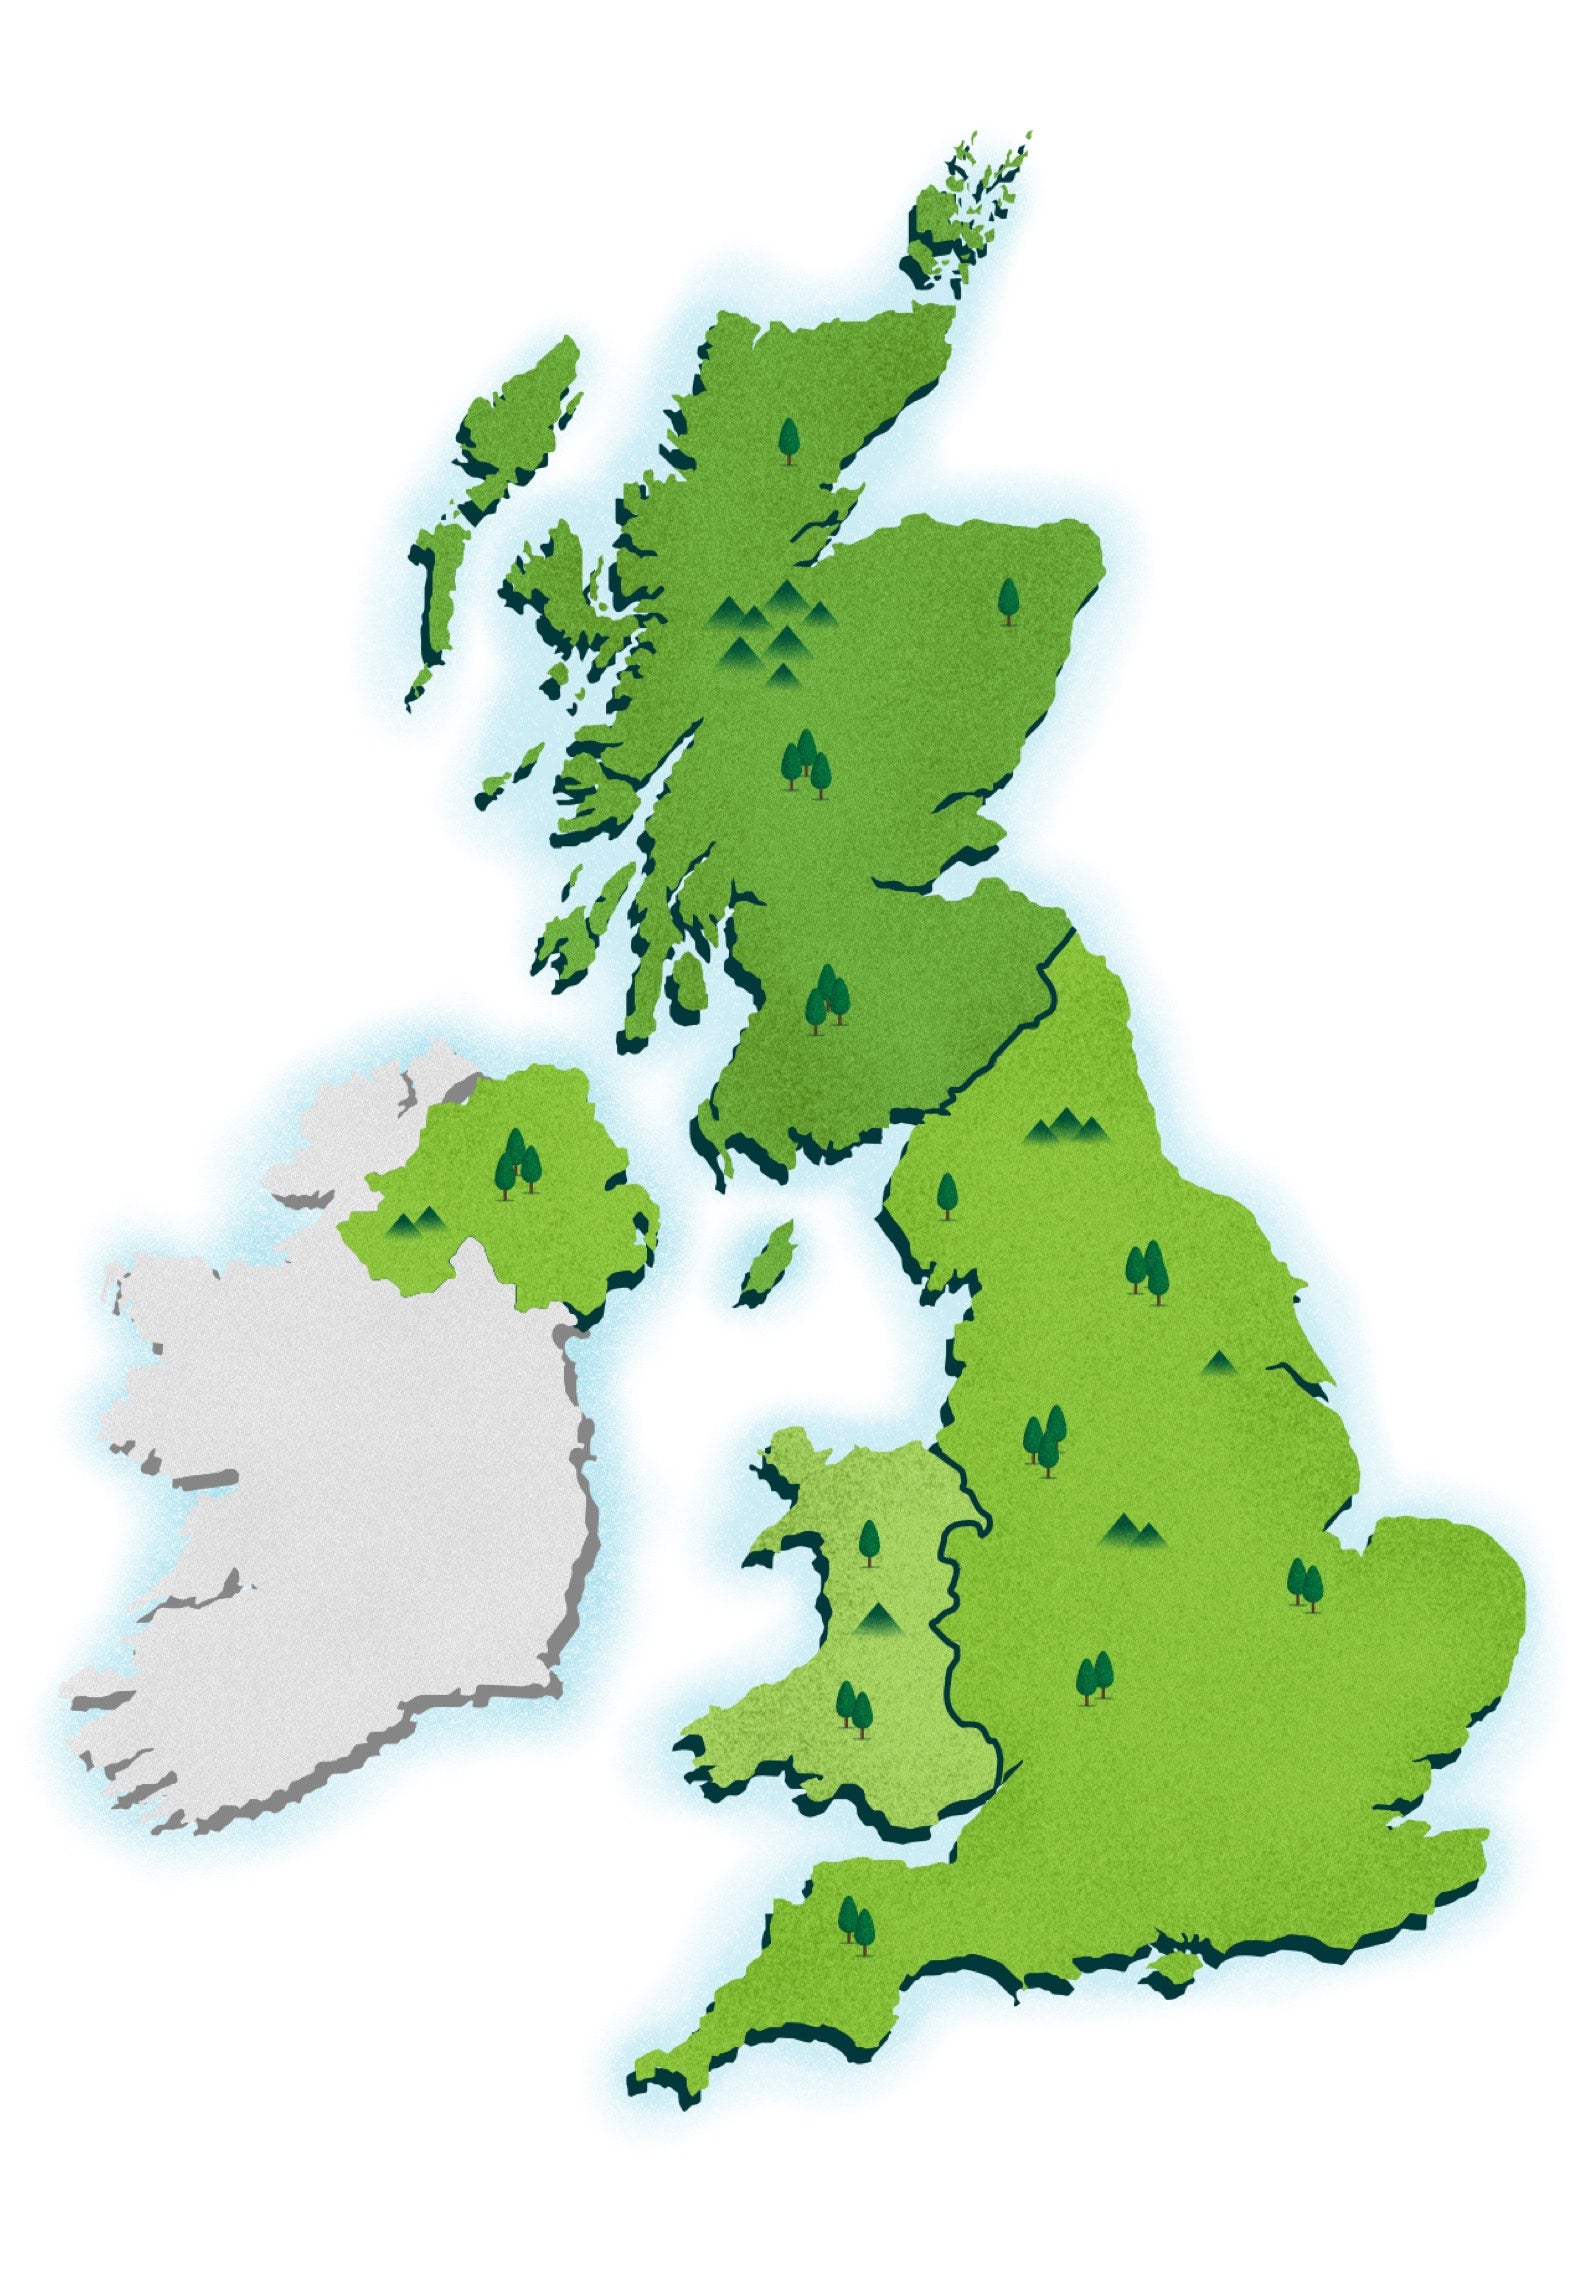 Simple map of the United Kingdom.